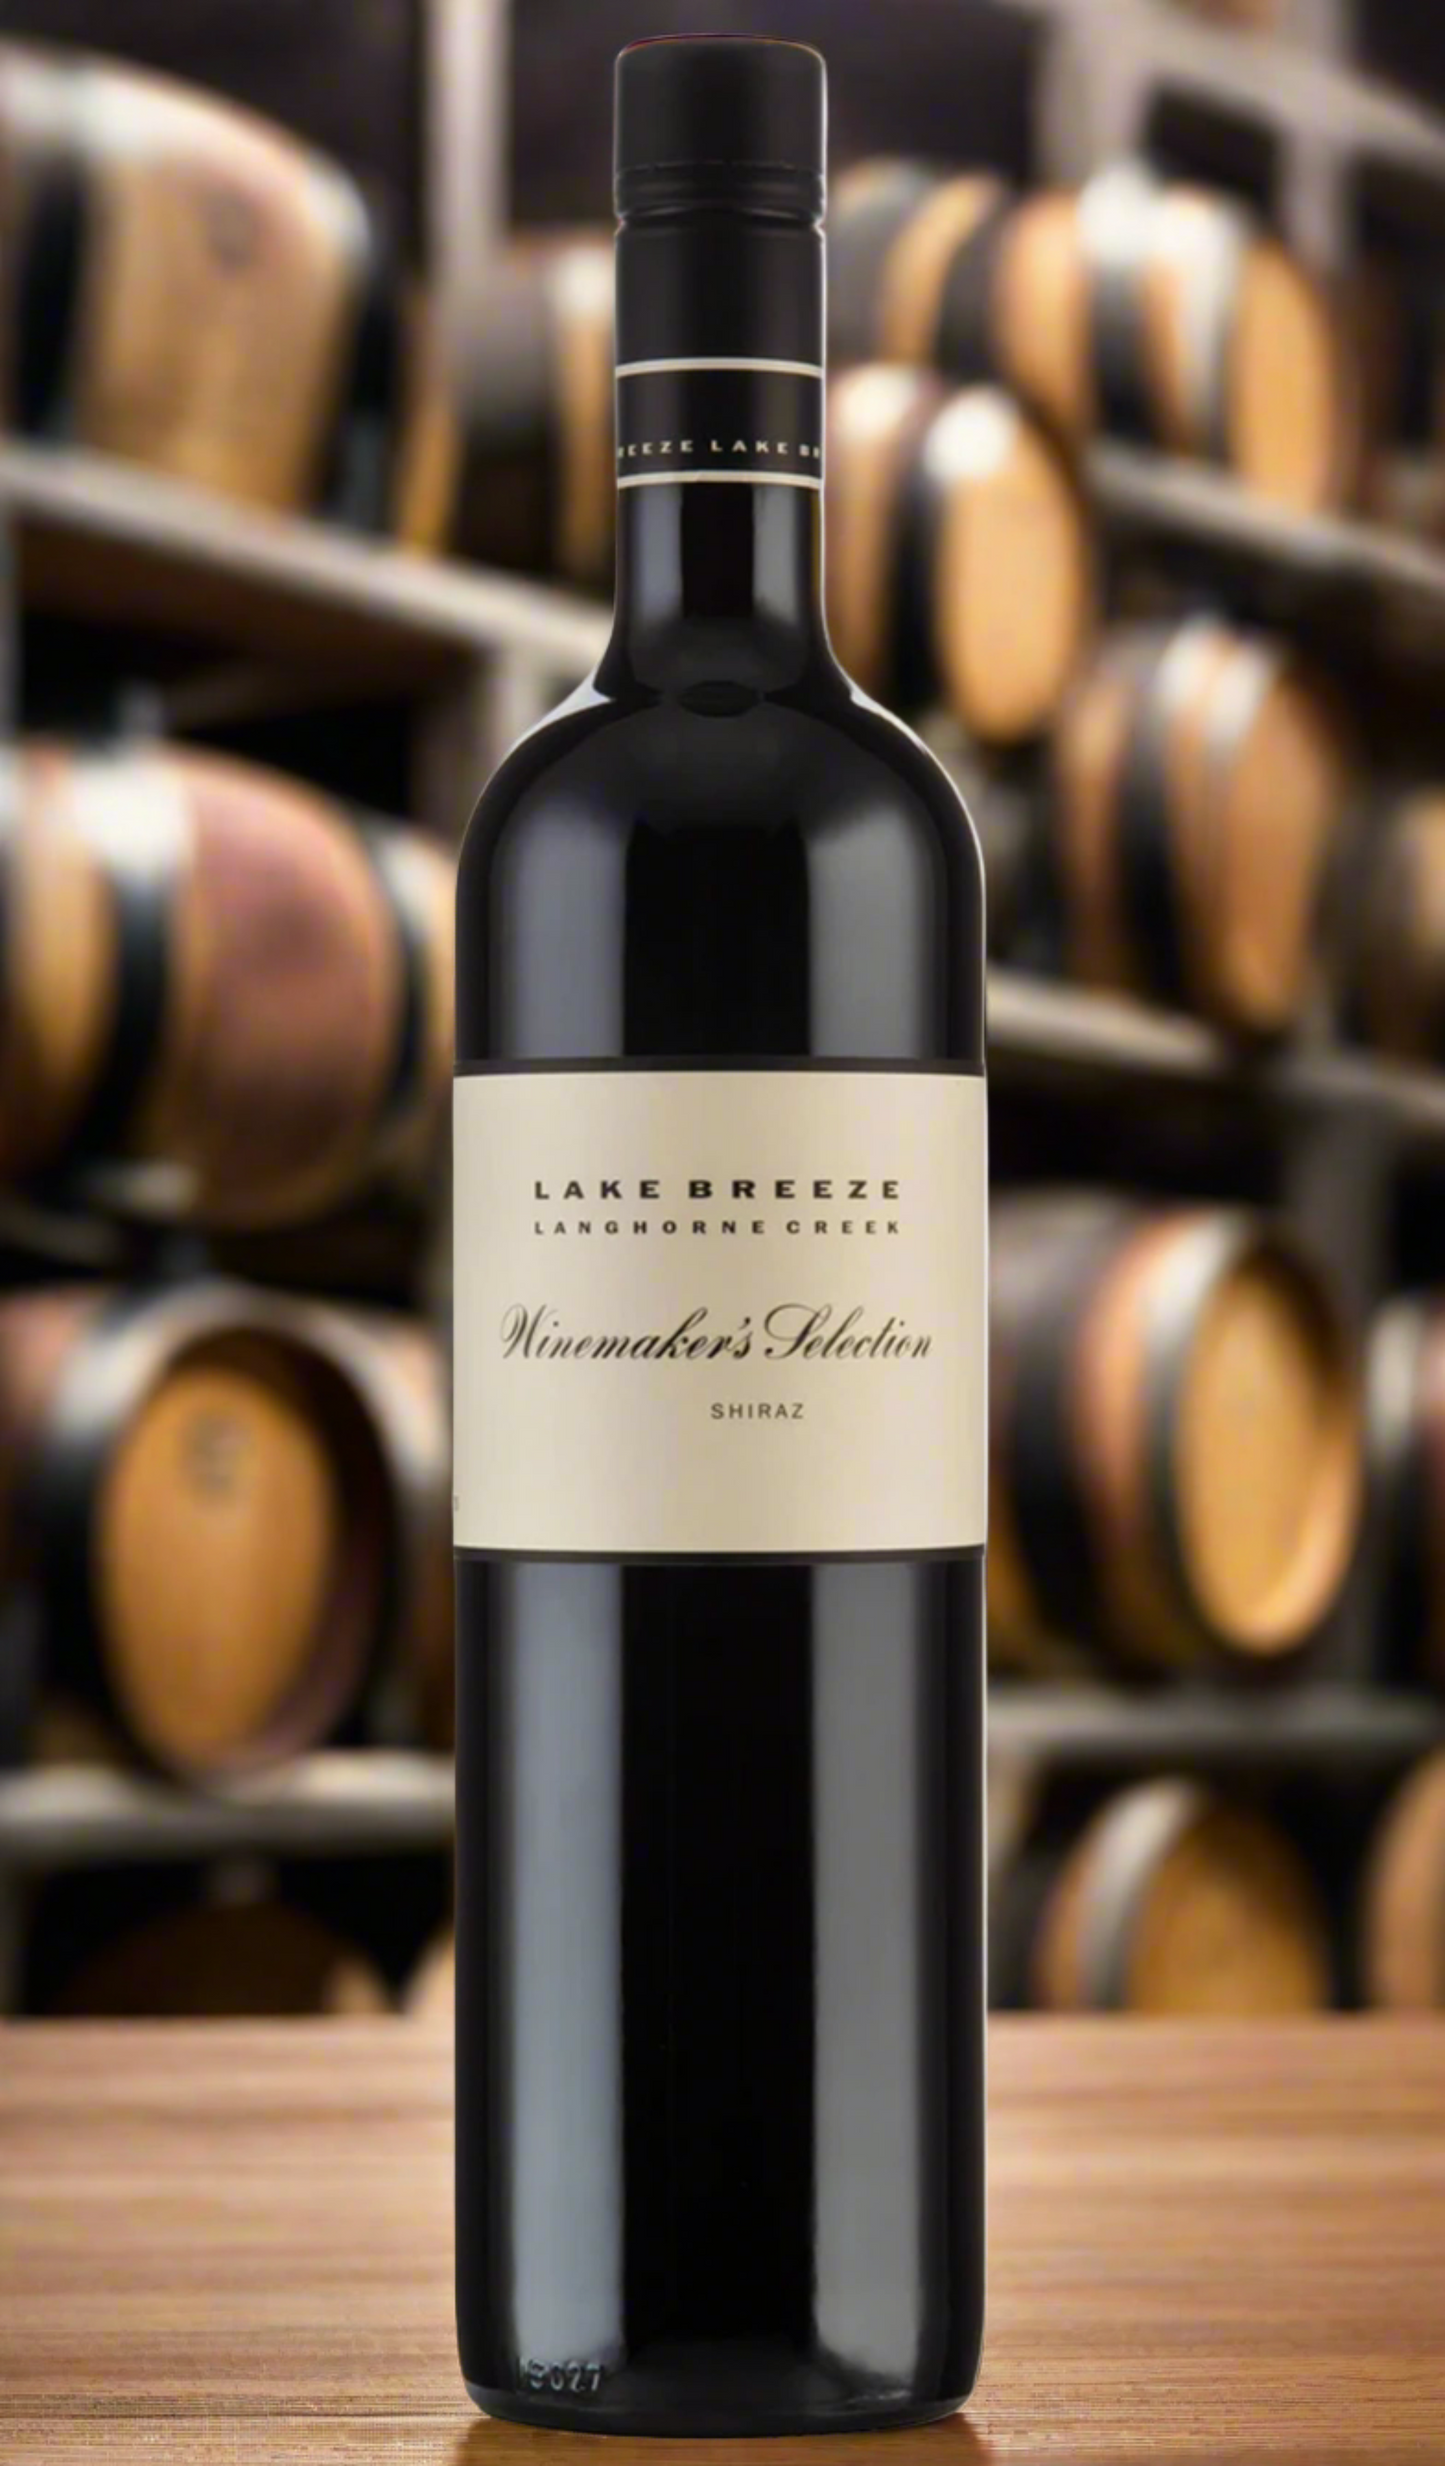 Find out more or buy Lake Breeze Winemaker’s Selection Shiraz 2019 online at Wine Sellers Direct - Australia’s independent liquor specialists.